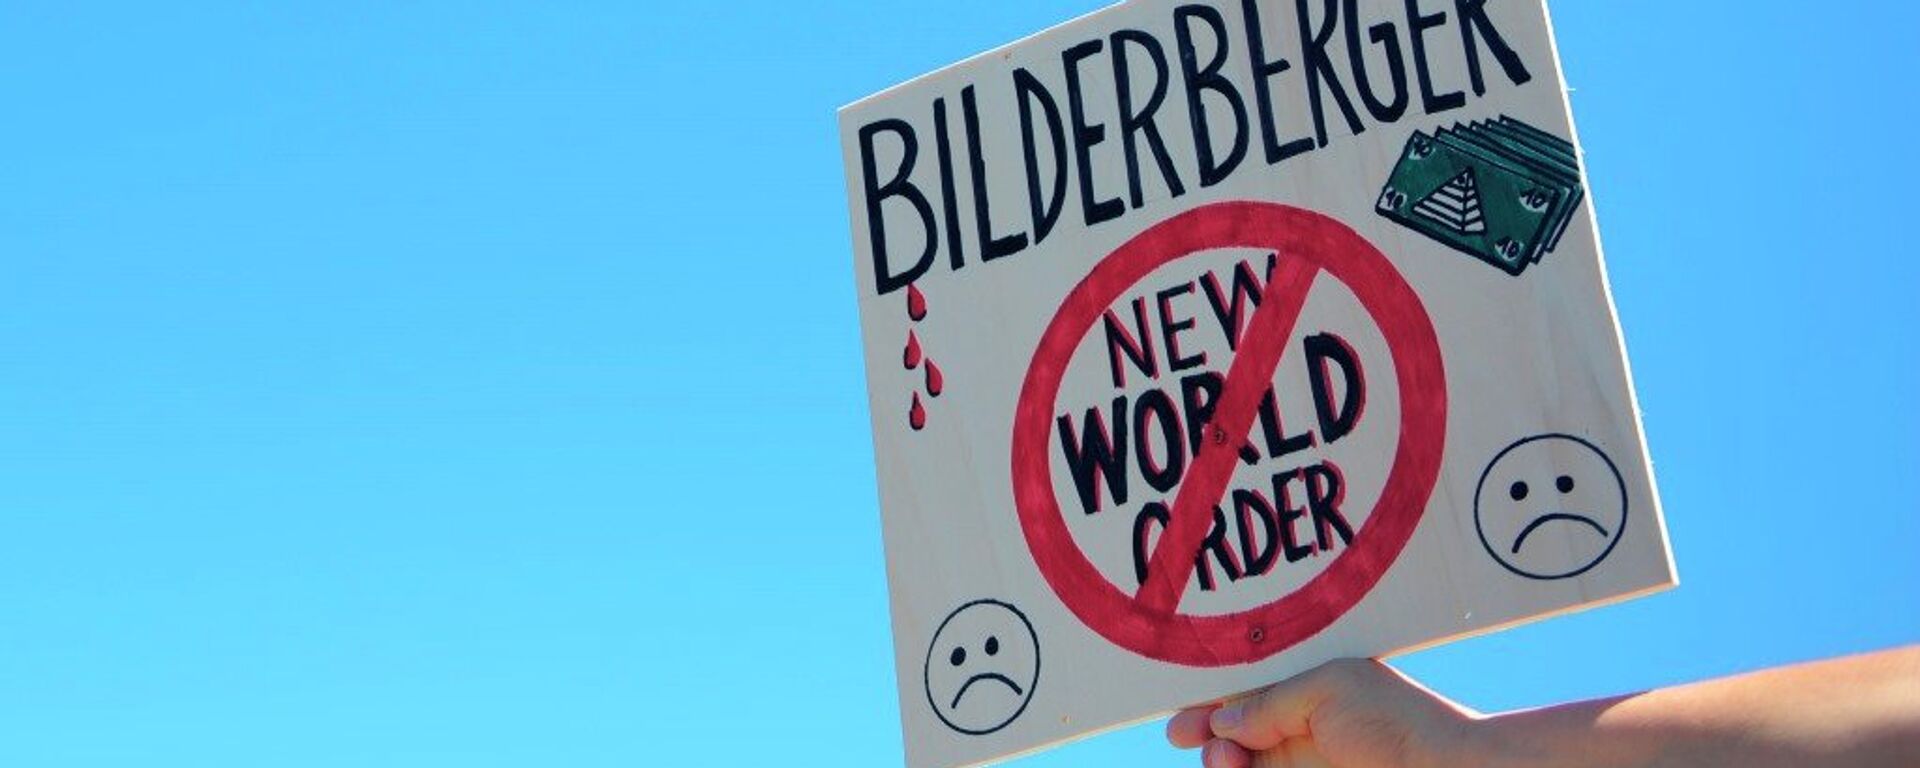 An activist protests near the meeting place for the conference of the Bilderberg Group - Sputnik International, 1920, 09.06.2018